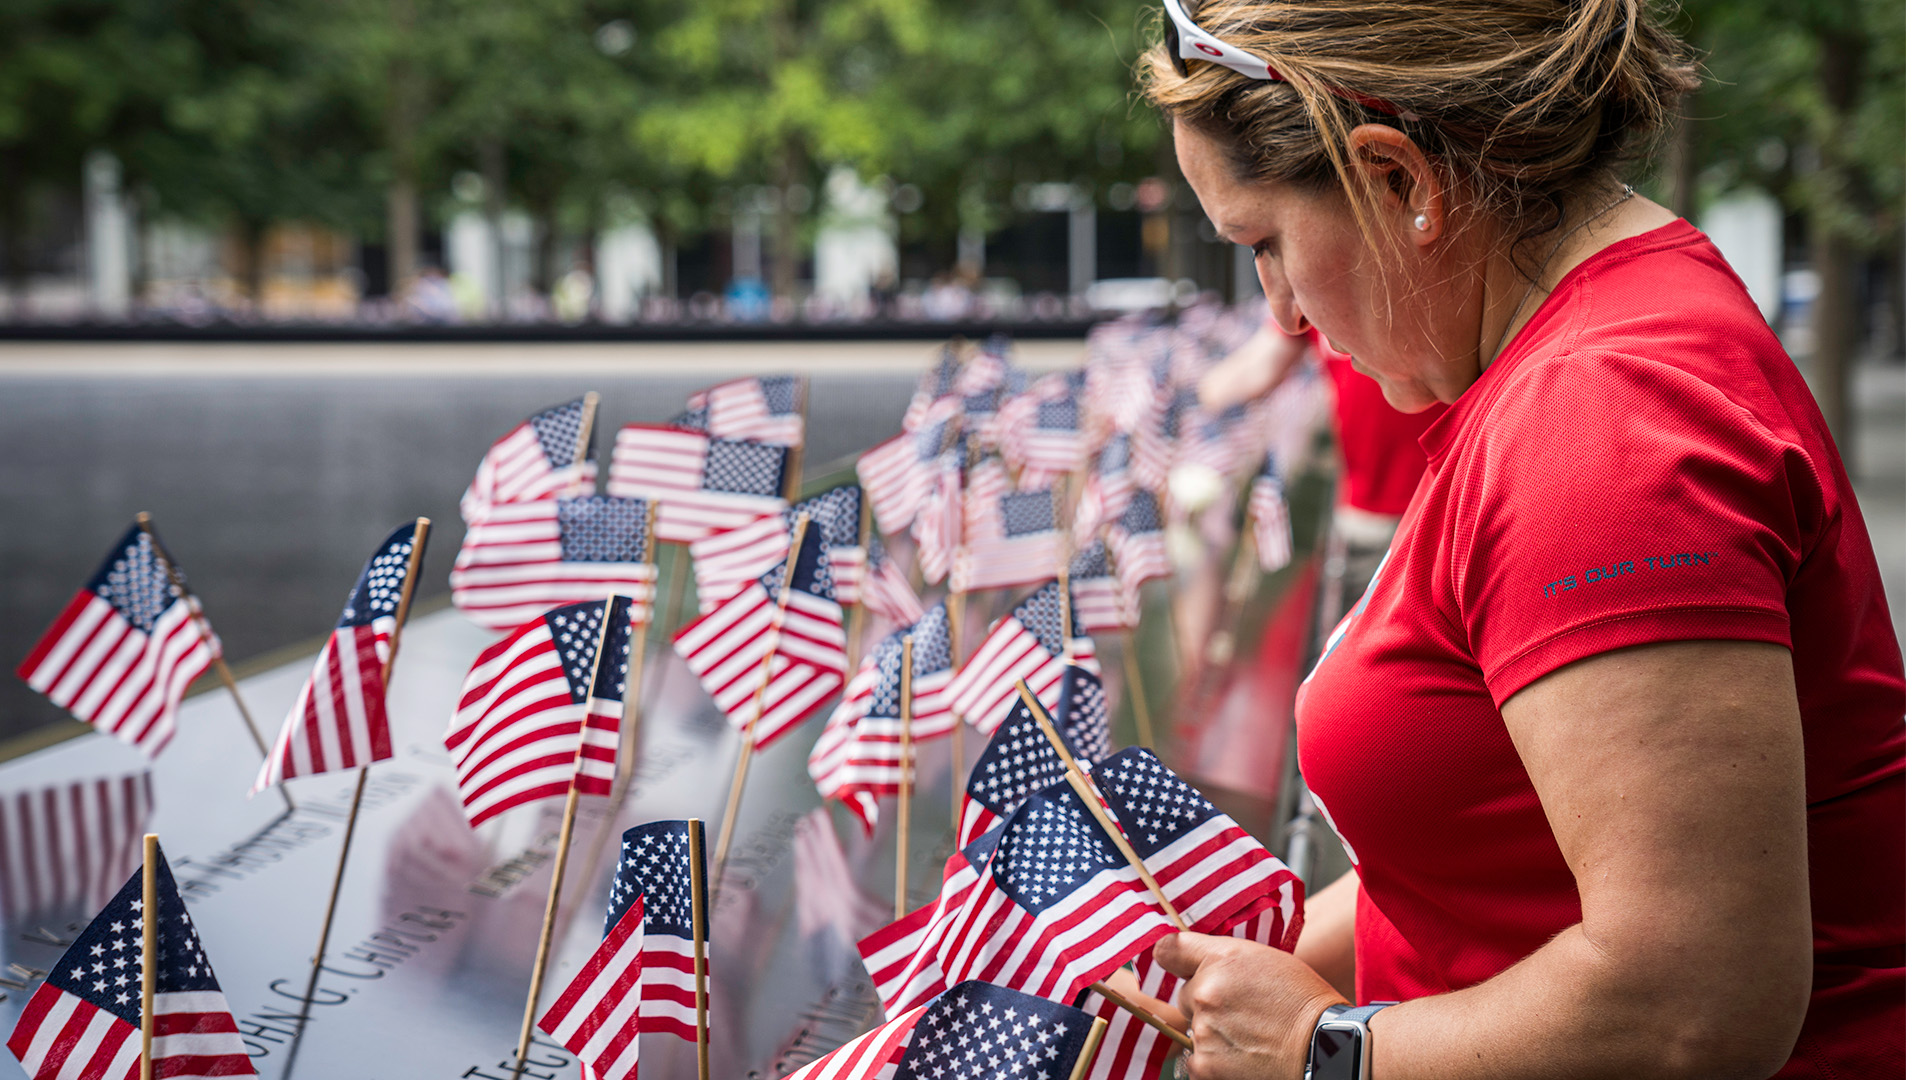 A woman in a red top leans over the 9/11 Memorial, which is lined with small American flags at each victim's name